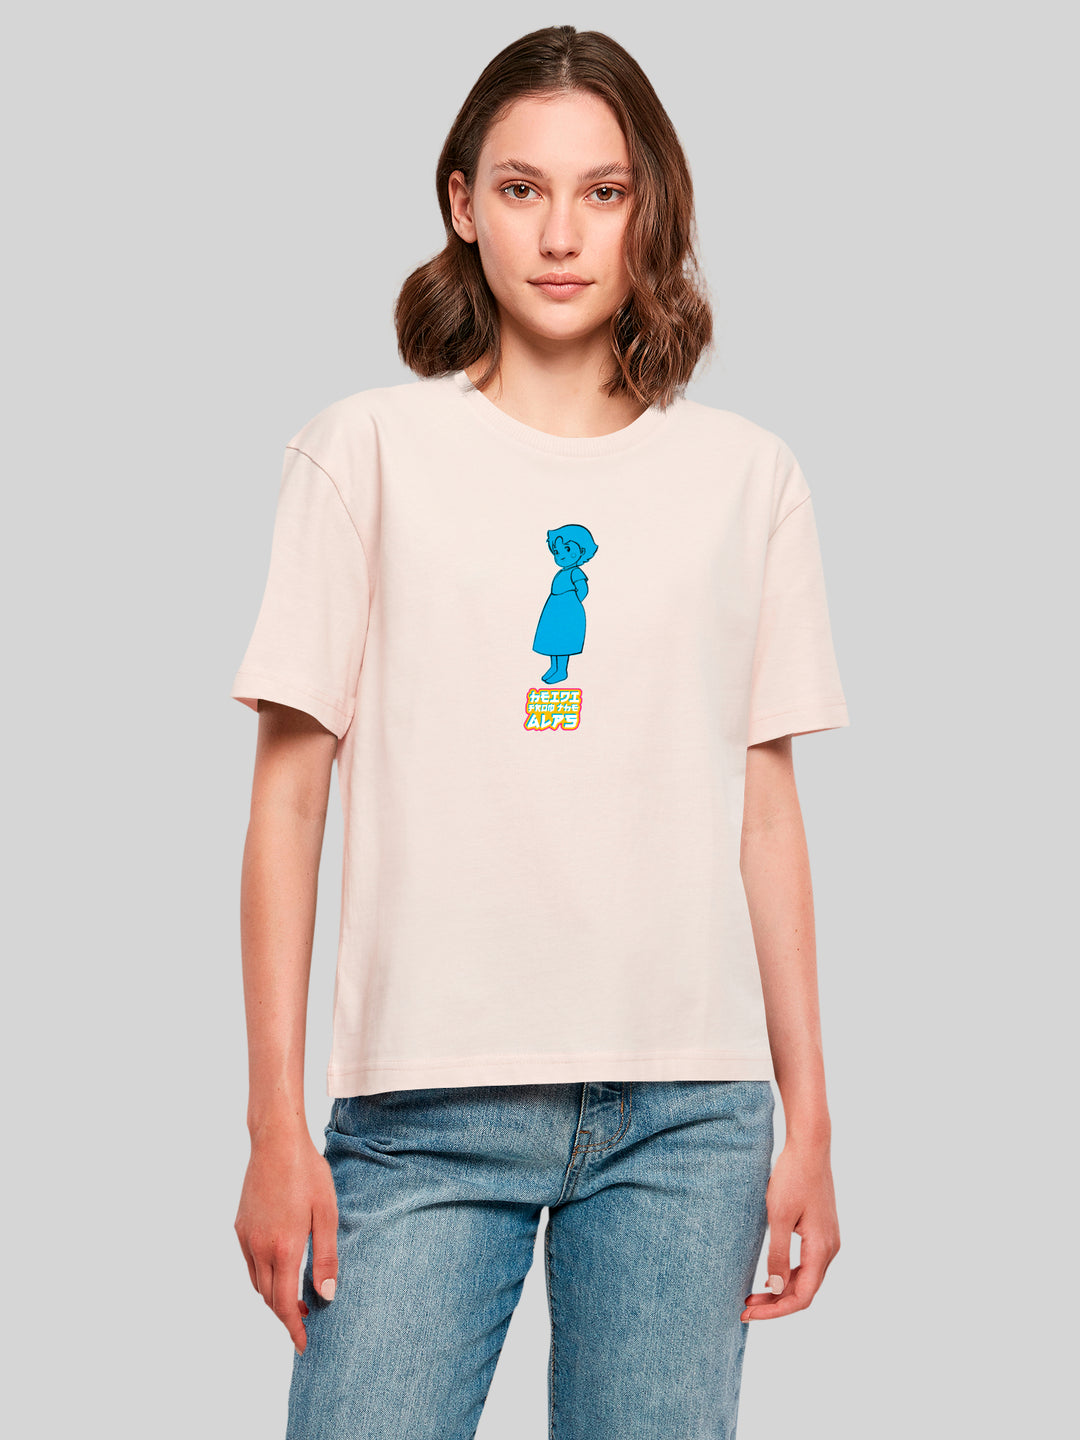 Heidi From The Alps | Heroes of Childhood | Girls Everyday Tee